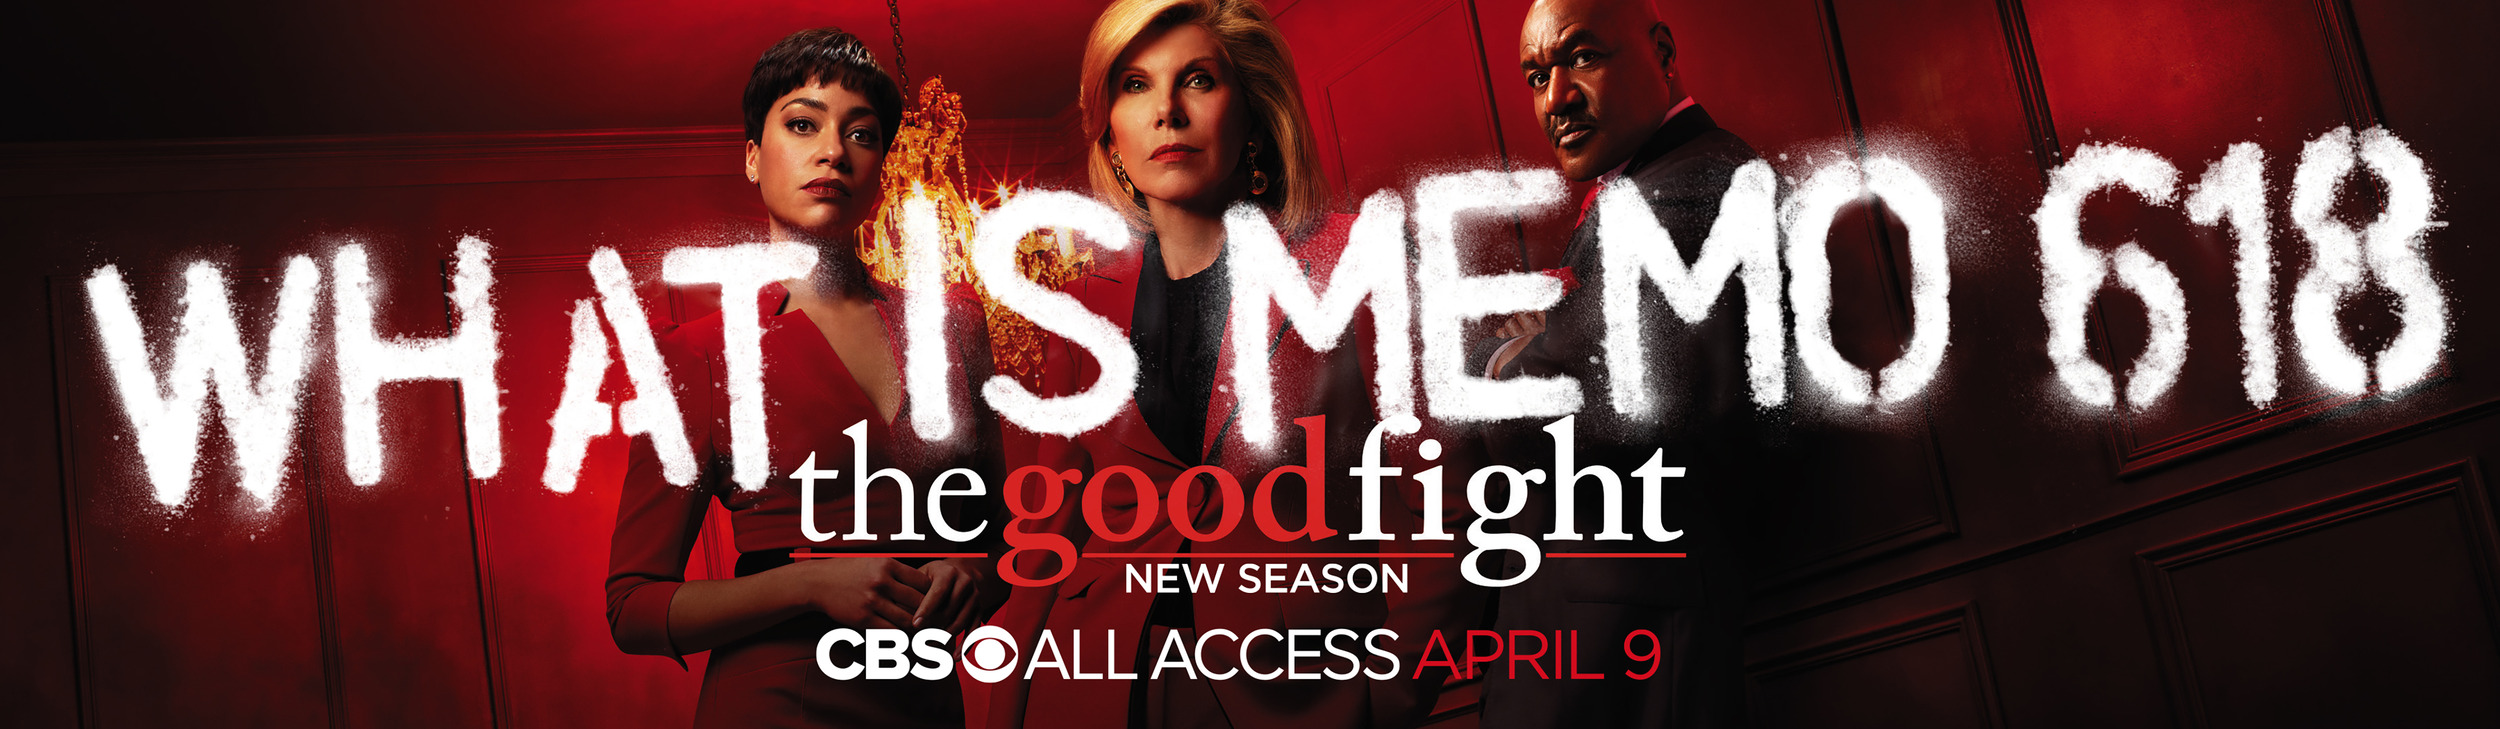 Mega Sized TV Poster Image for The Good Fight (#16 of 17)